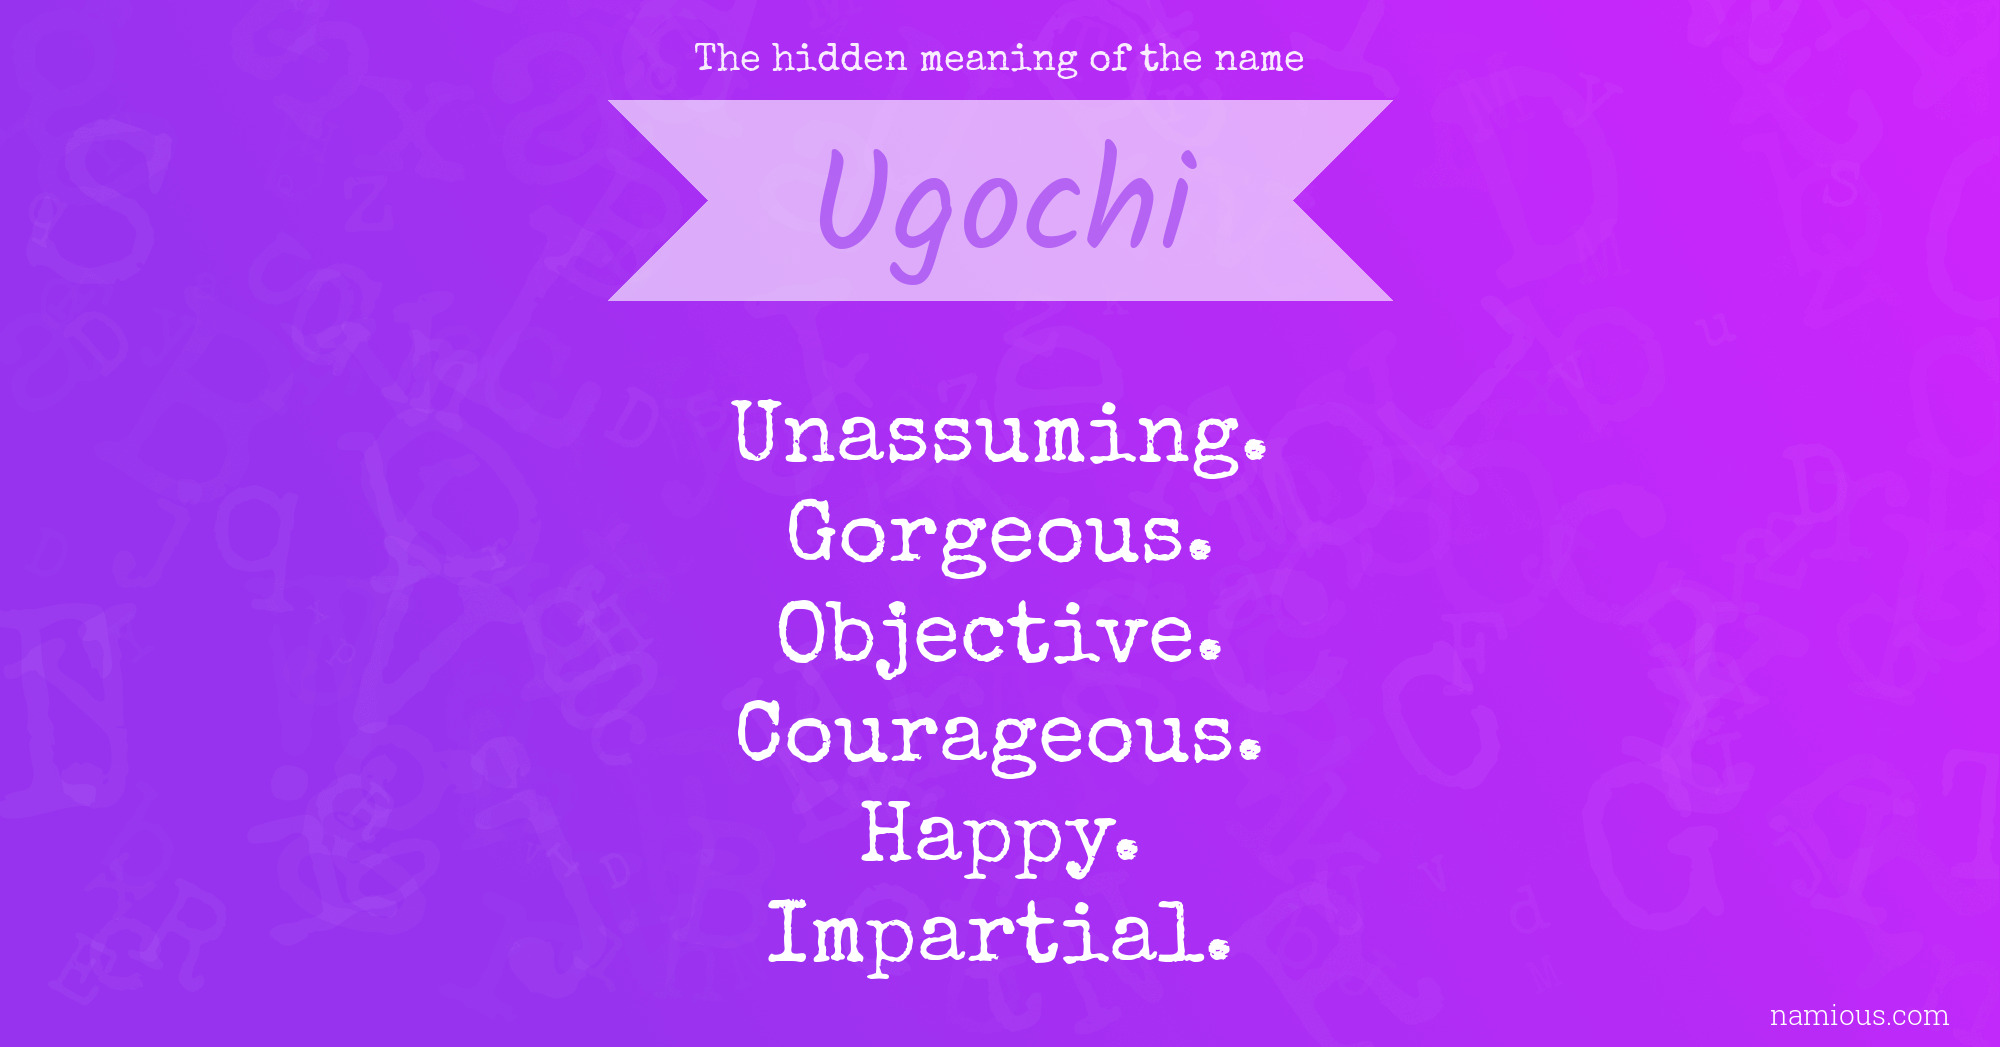 The hidden meaning of the name Ugochi